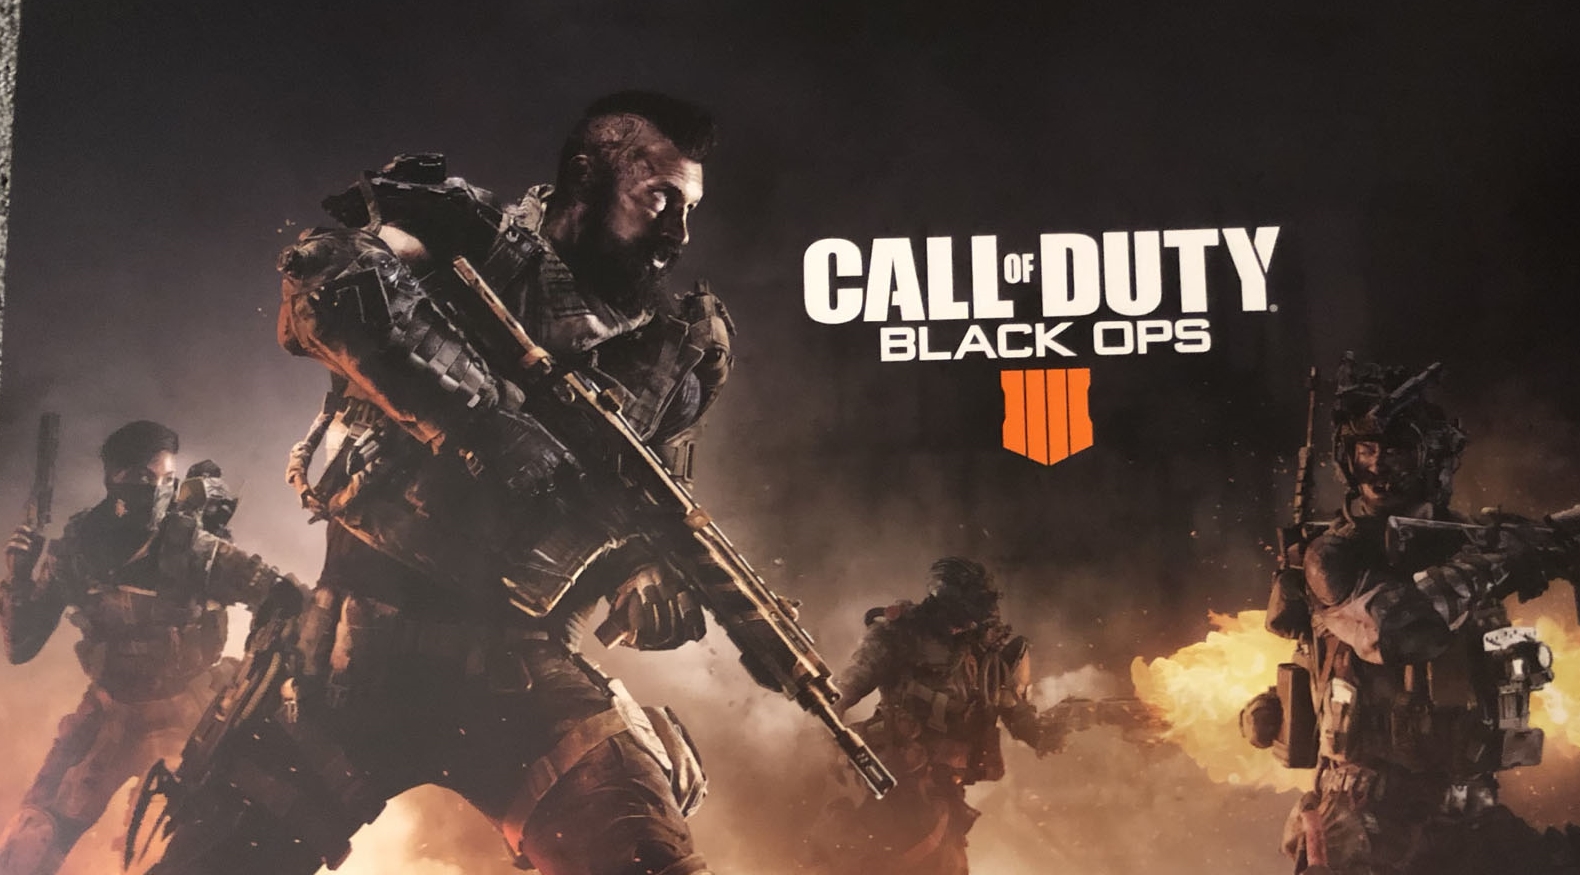 where to buy call of duty black ops 4 pc